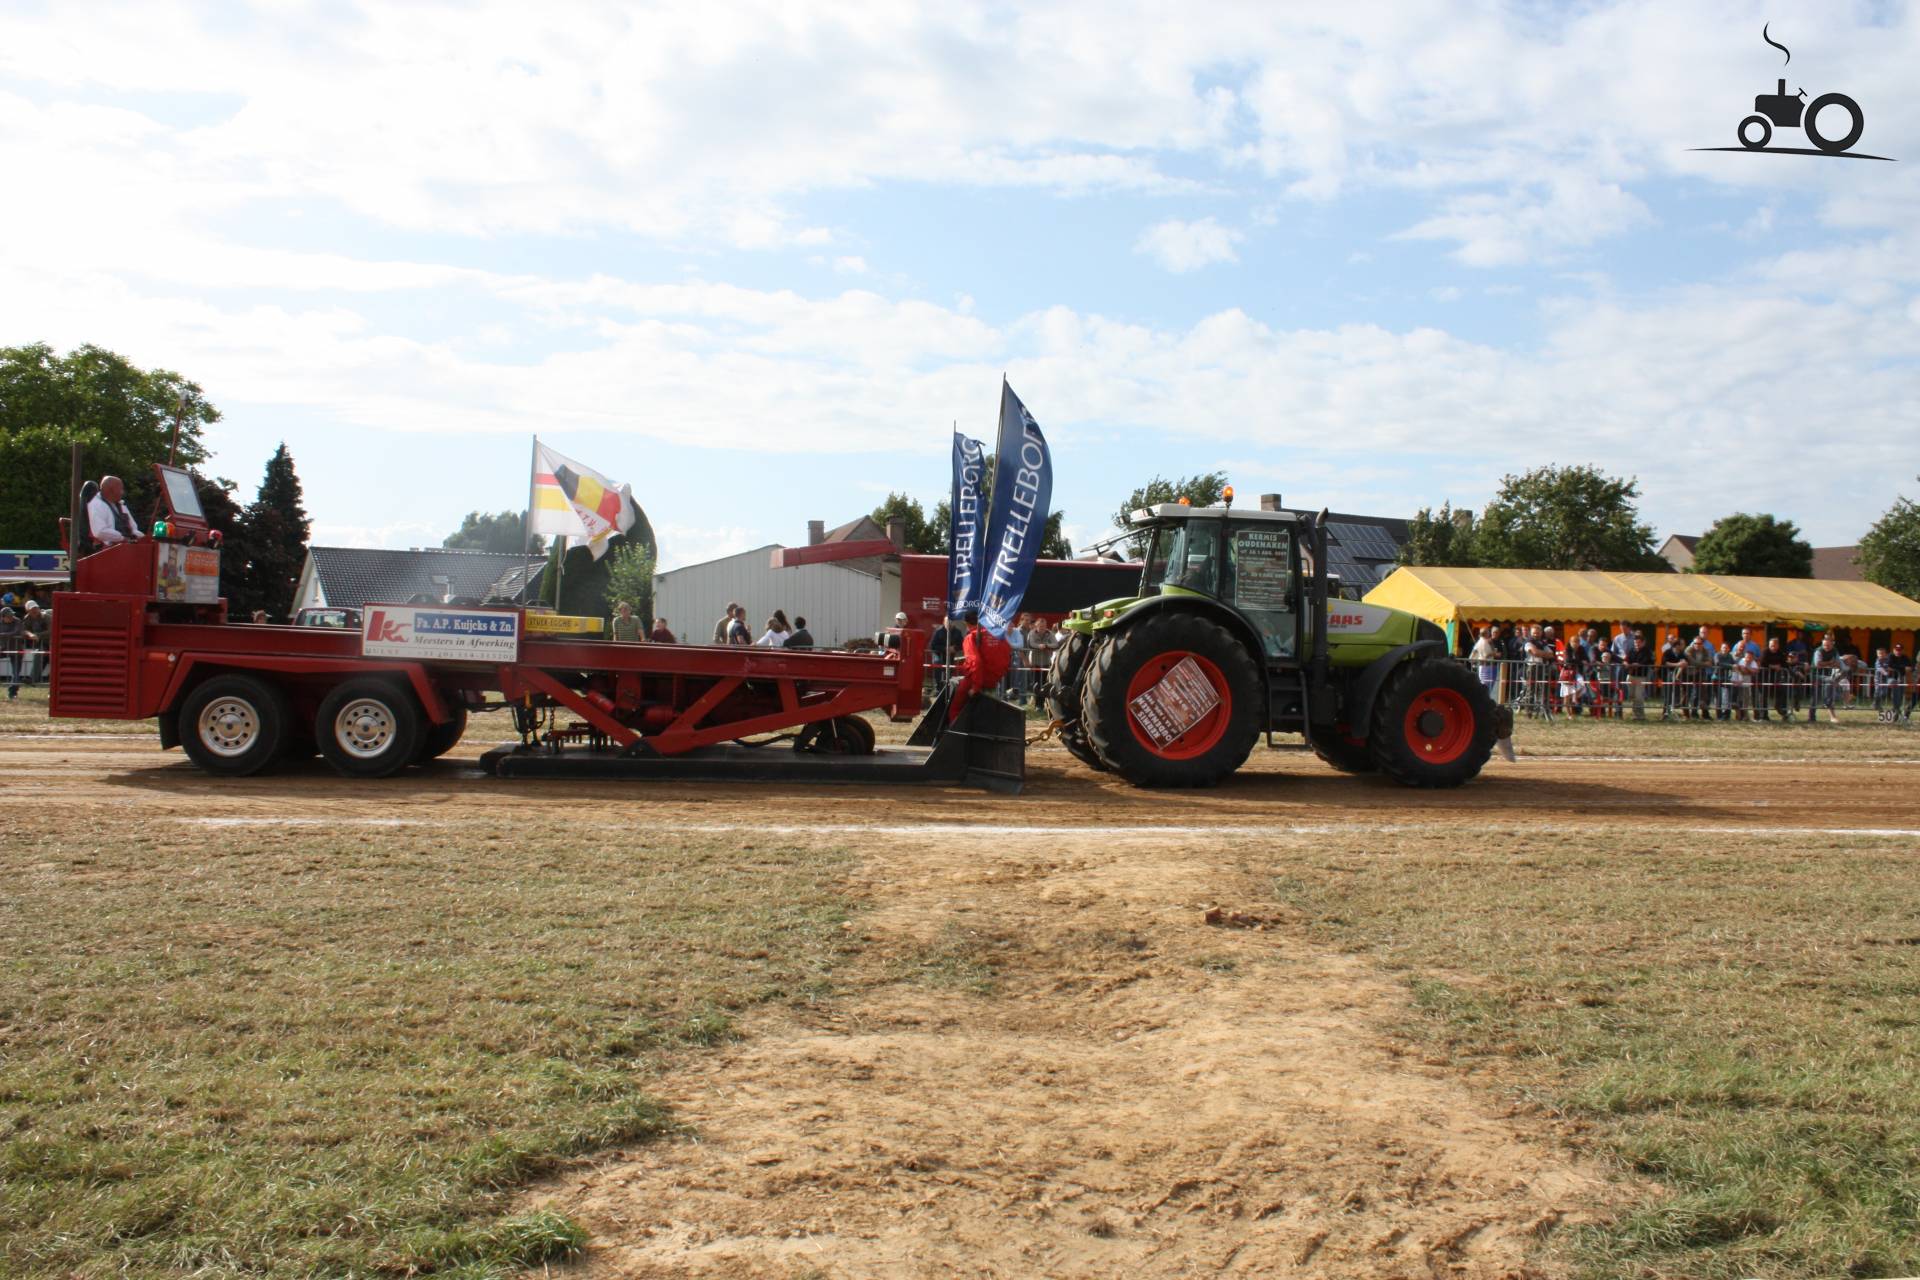 Claas Ares 836